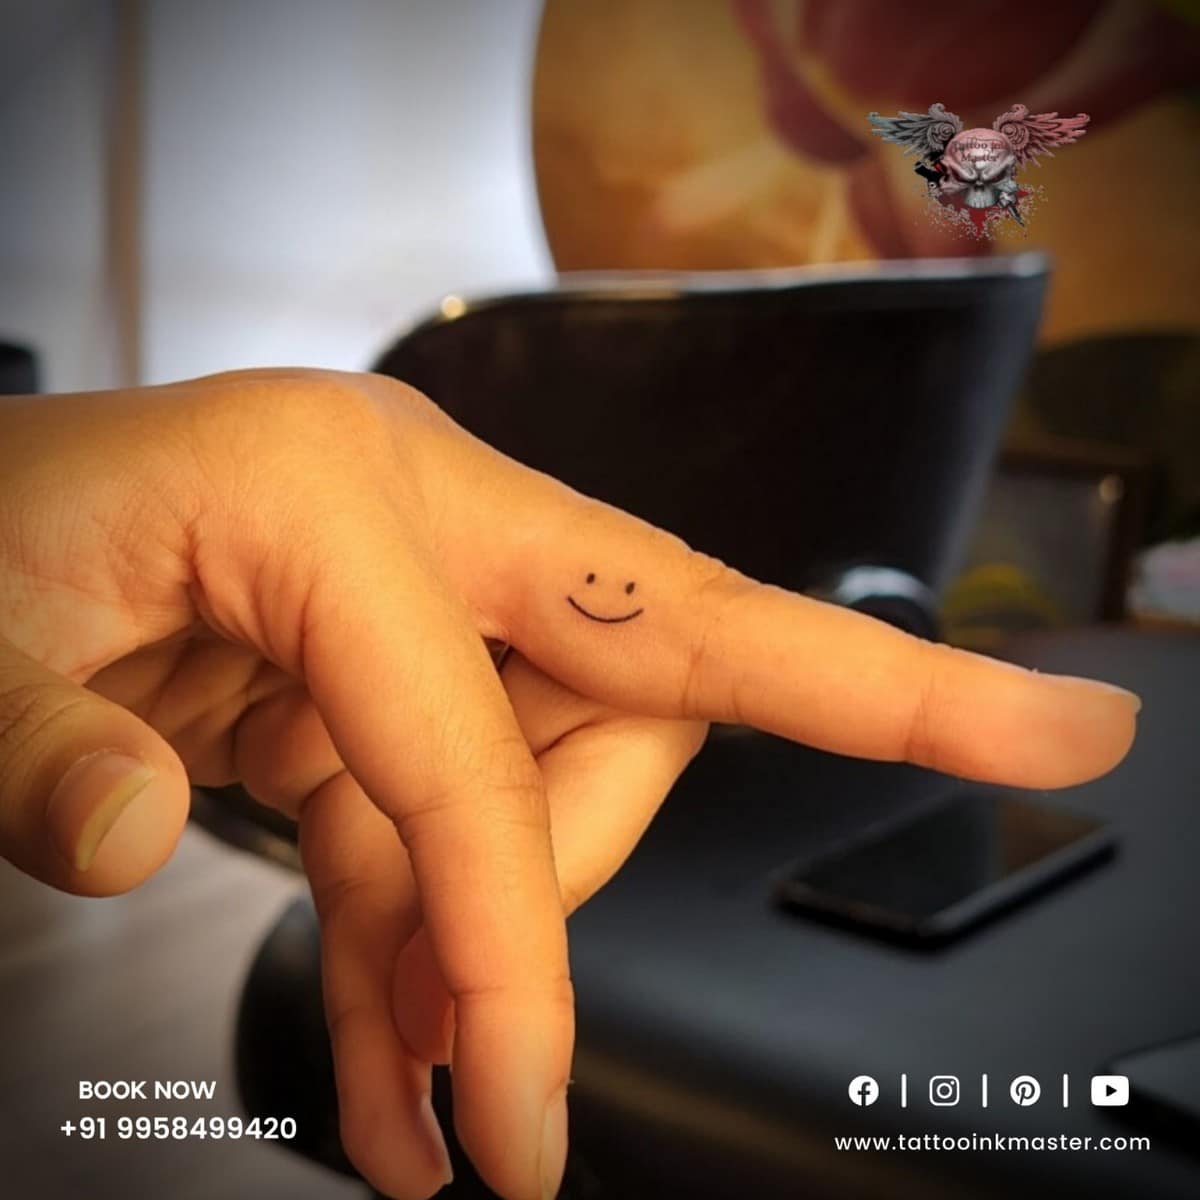 Top 30 Funny Smile Tattoo Design Ideas (2021 Updated) | Smile tattoo,  Smiley face tattoo, Hand tattoos